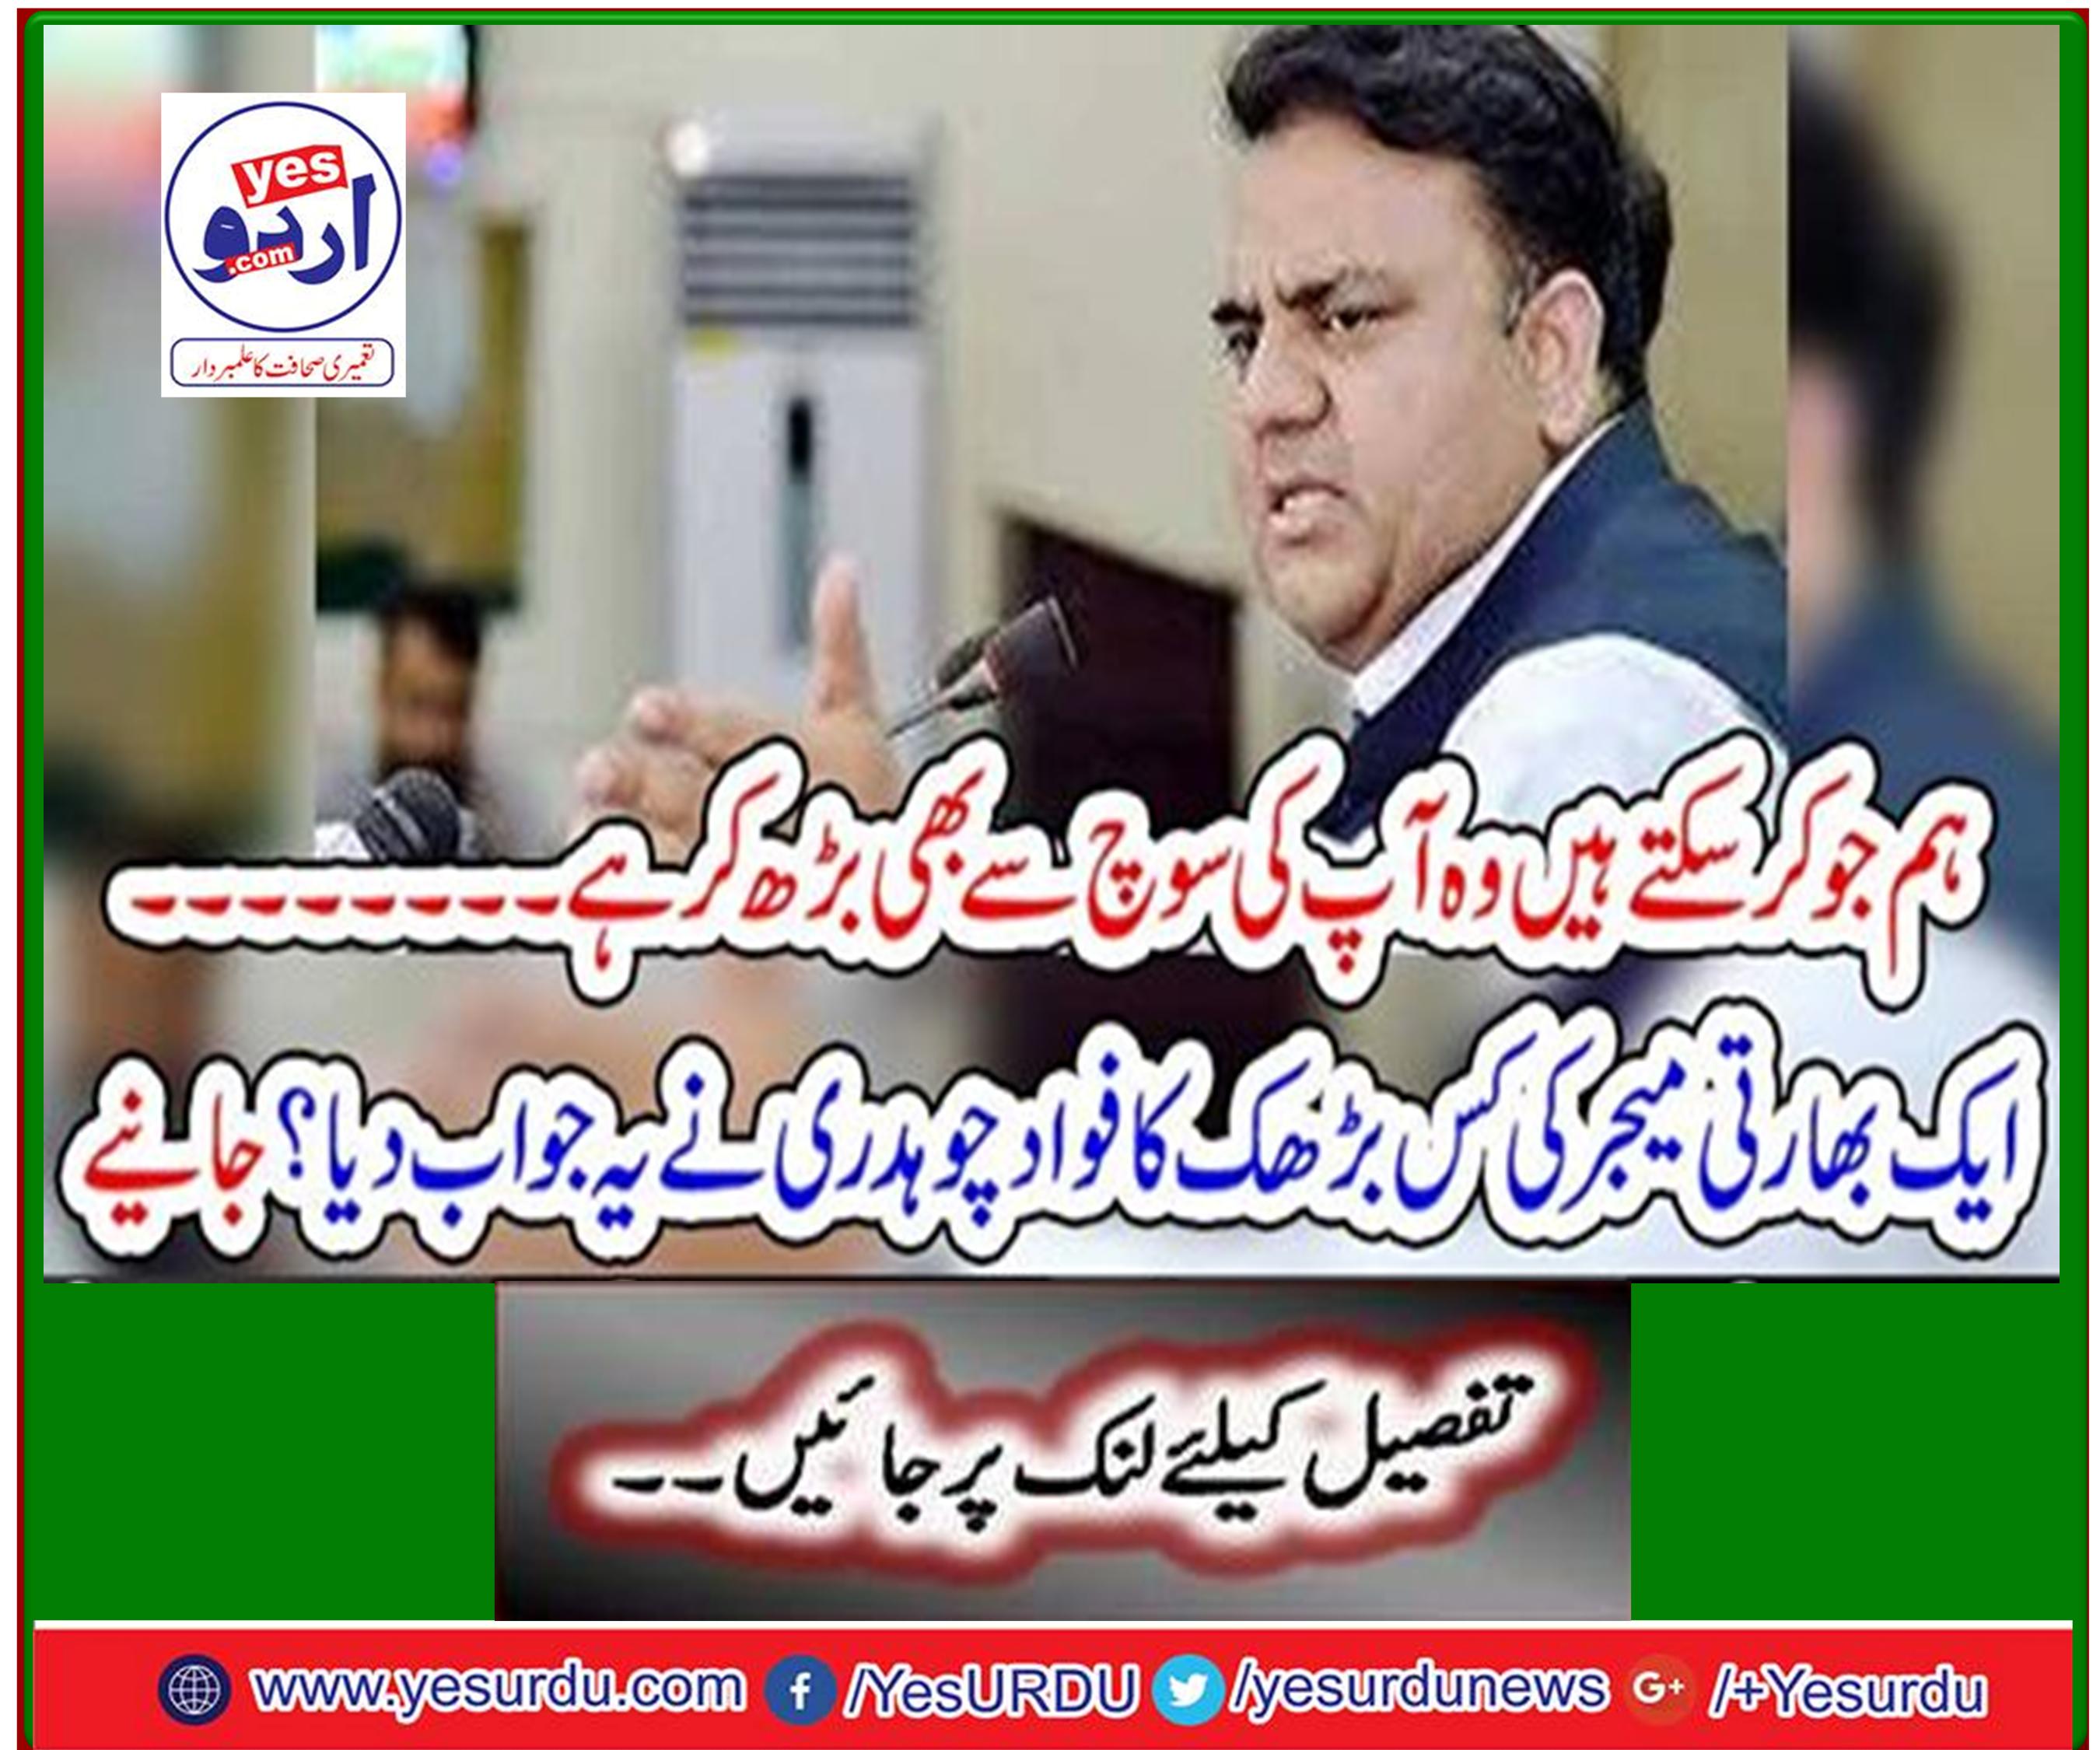 What we can do is more than you think ... Fawad Chaudhry responded to which Indian Major's rise? Learn